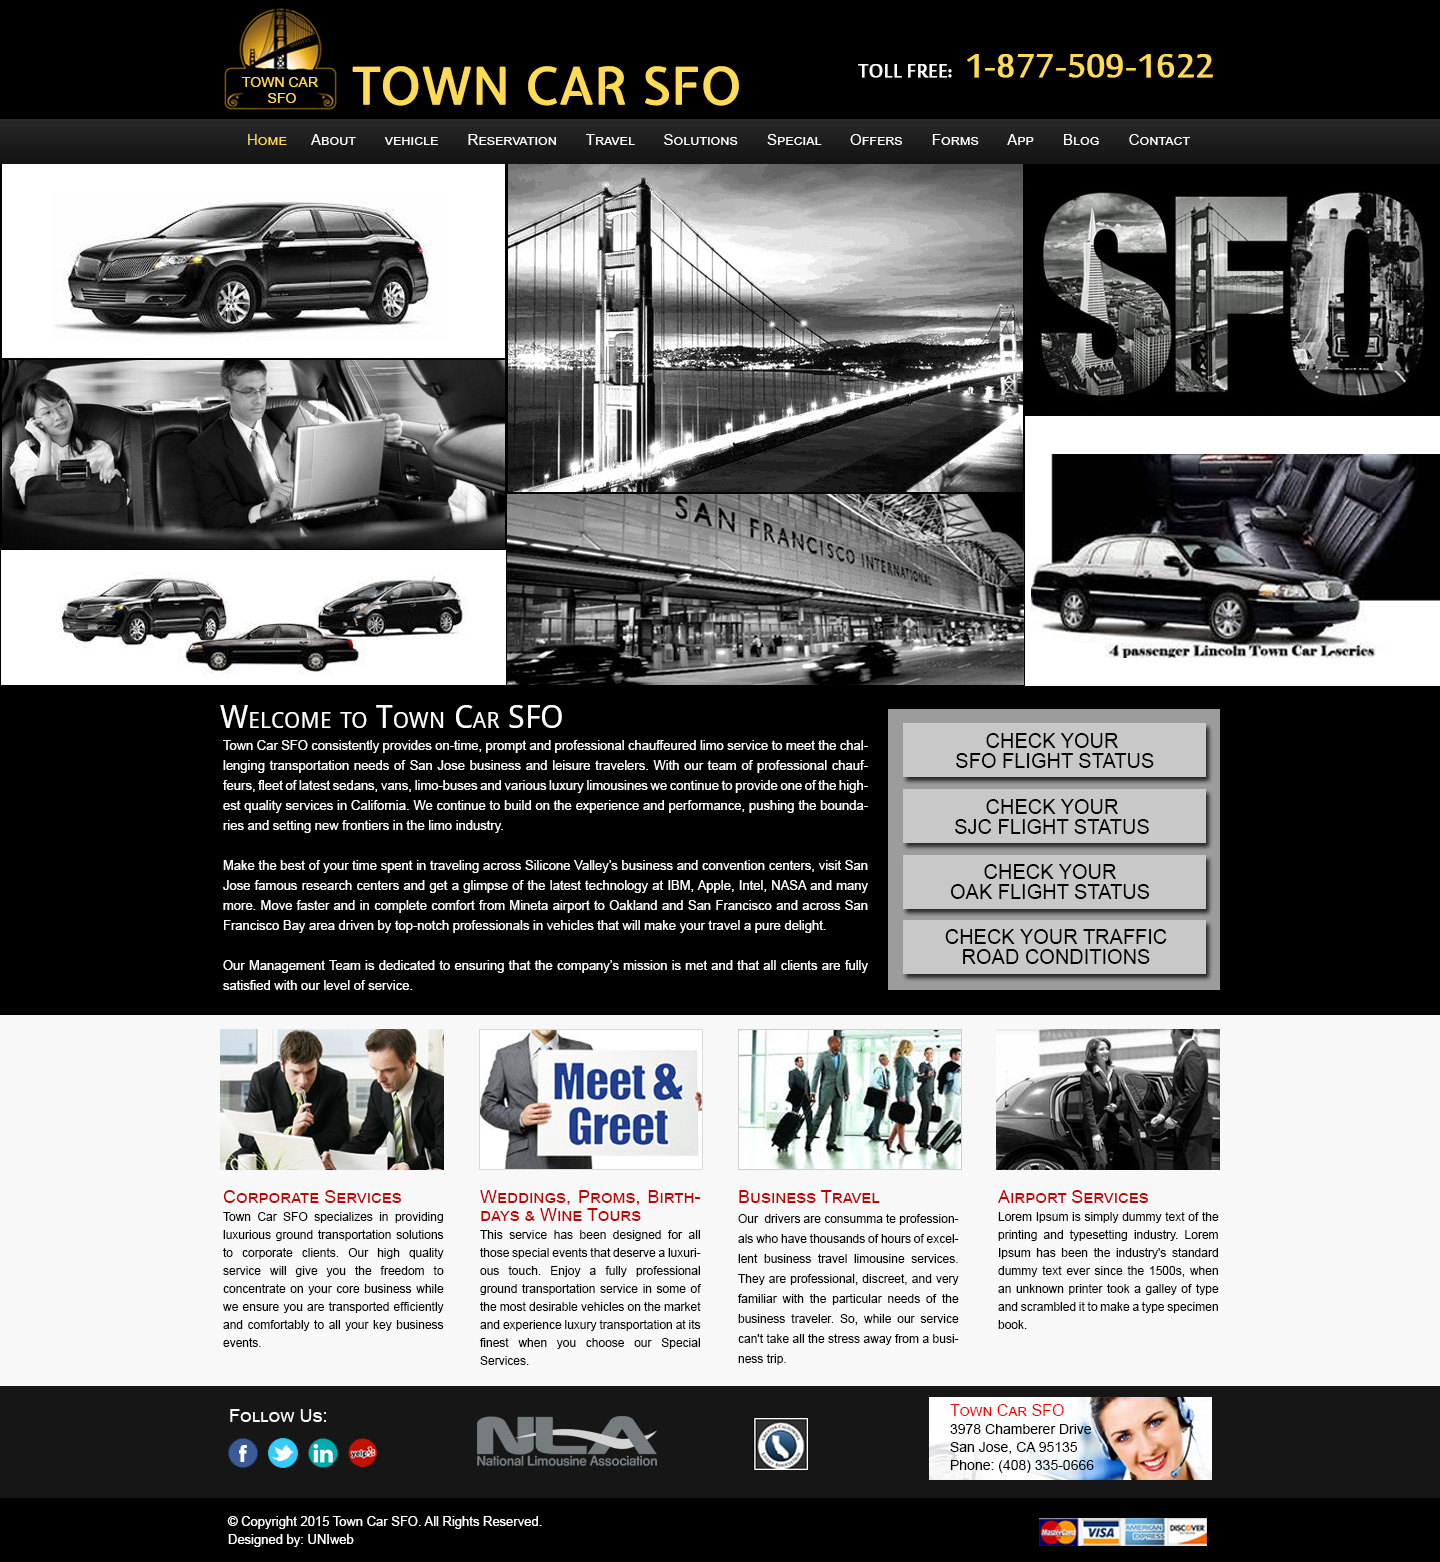 Welcome to TOWN CAR SFO